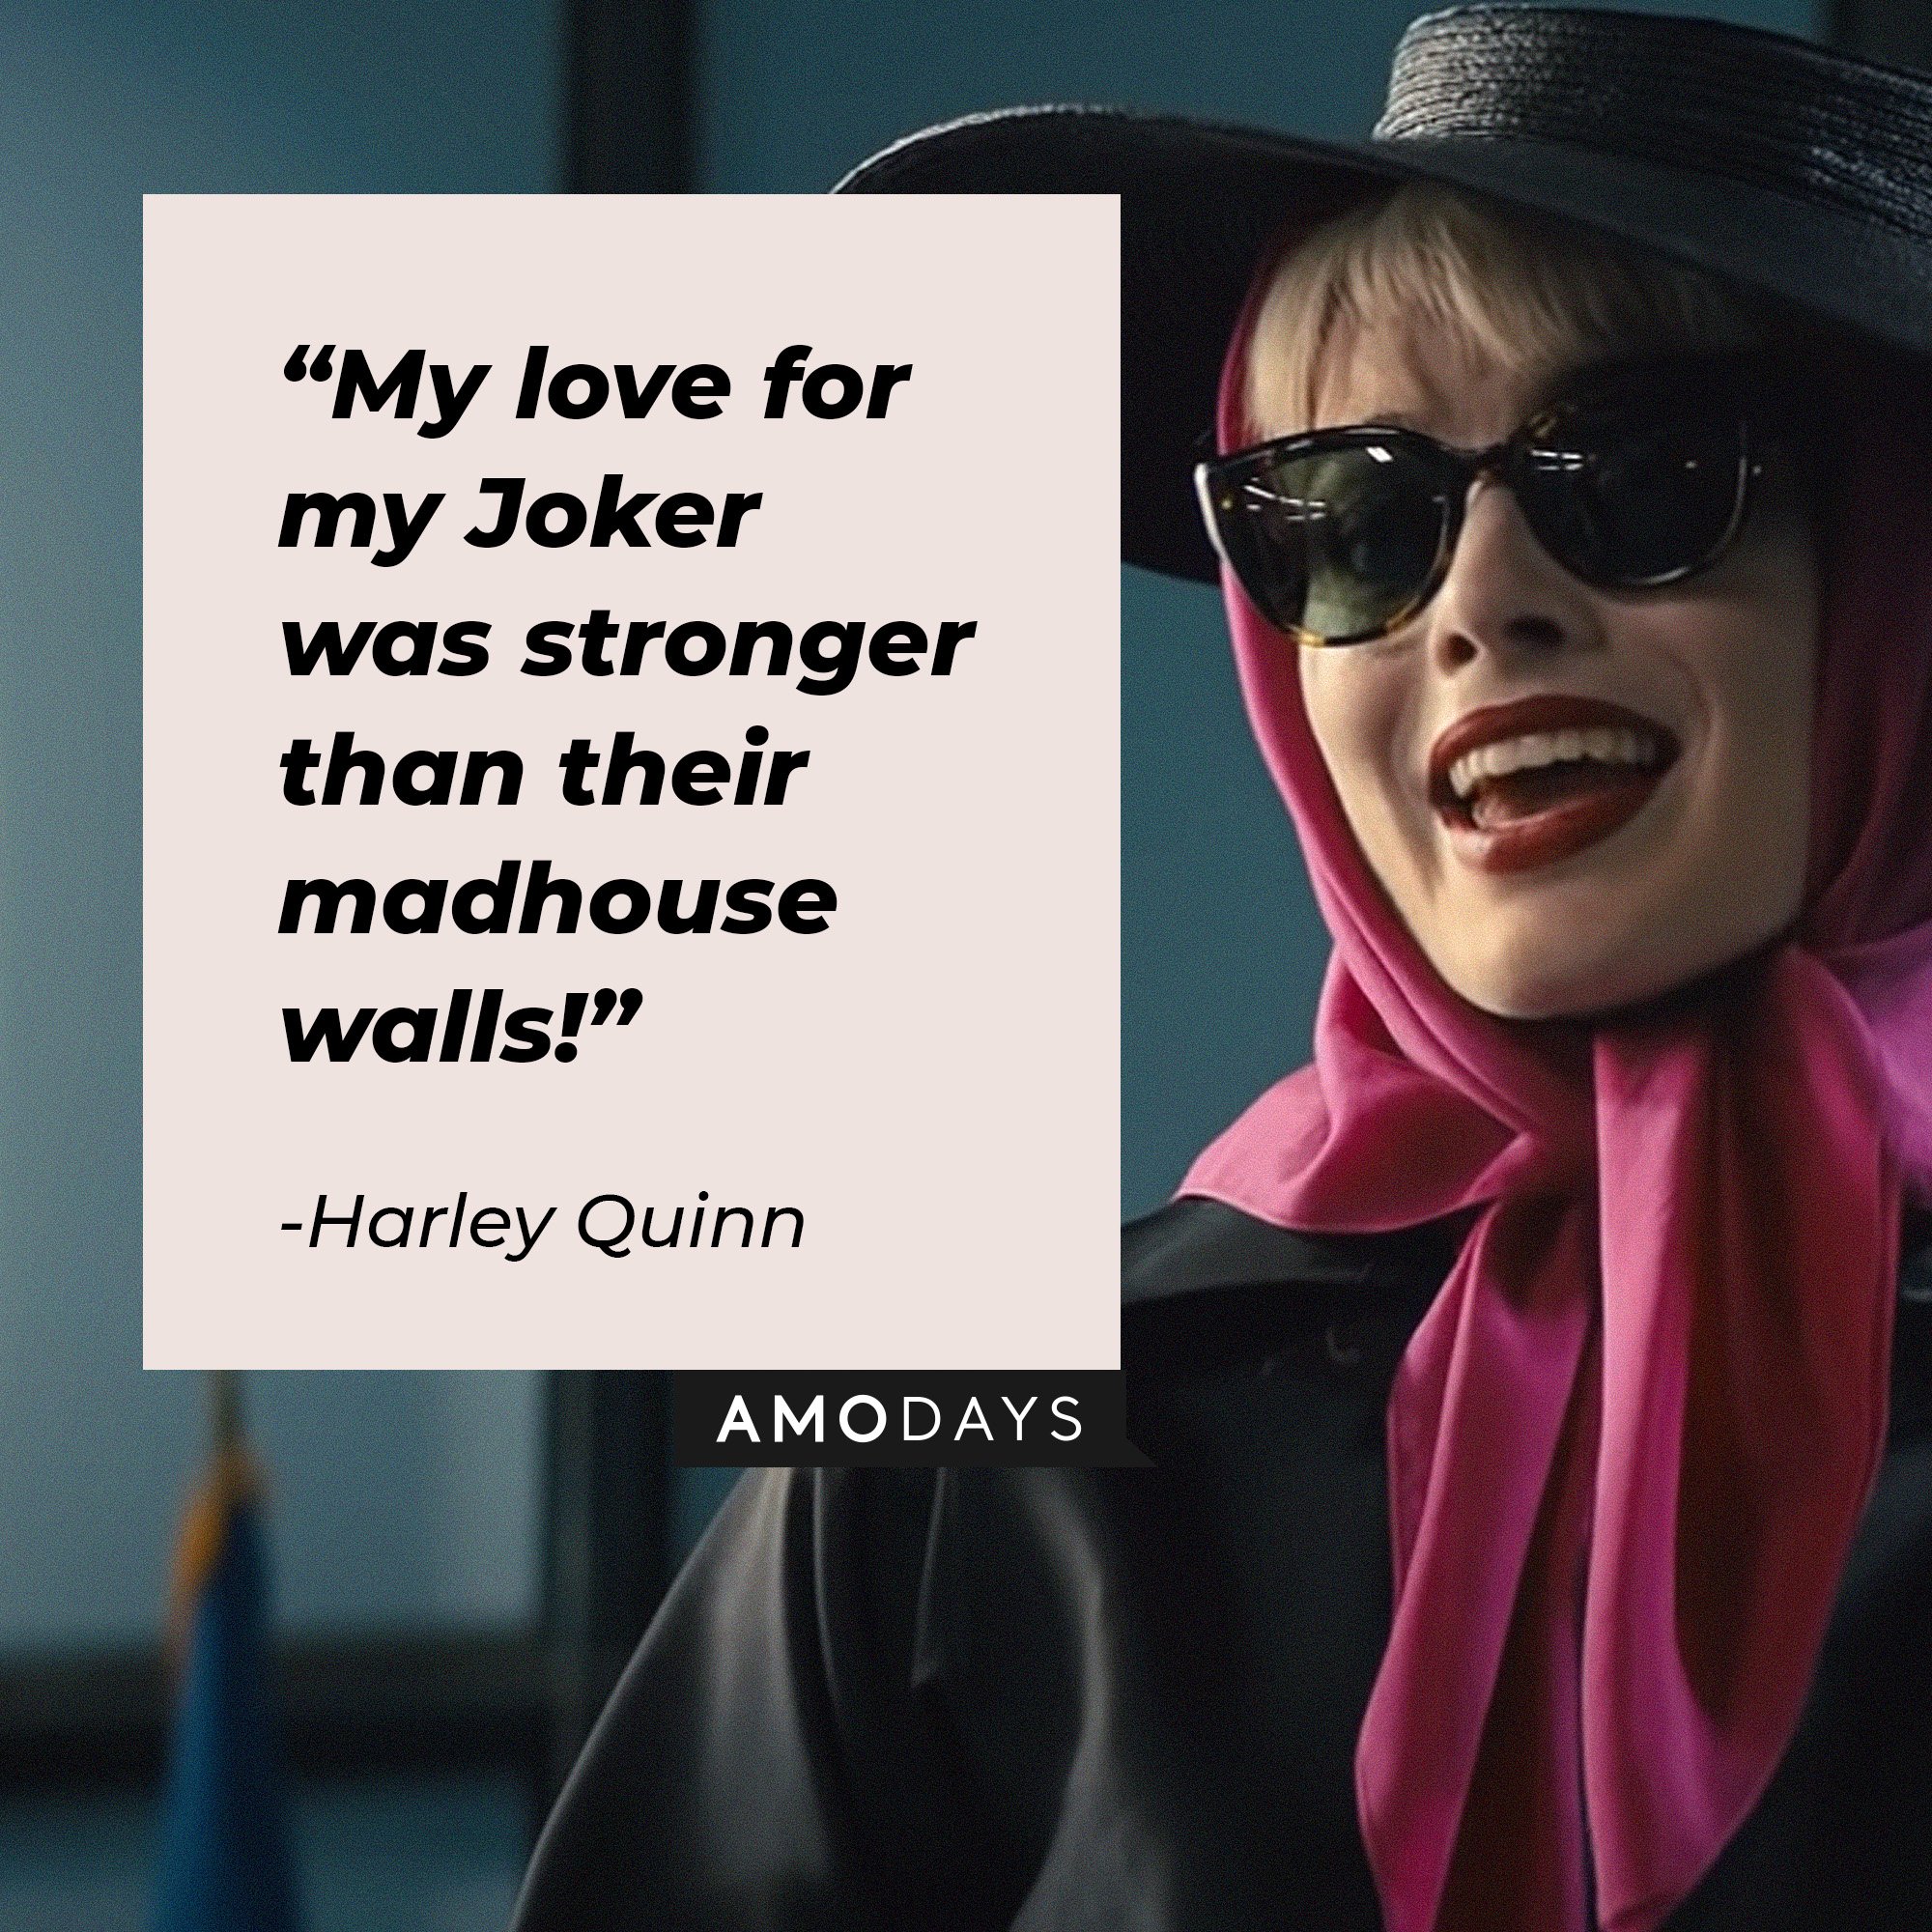 Harley Quinn's quote: “My love for my Joker was stronger than their madhouse walls!” |  Source: Image: AmoDays